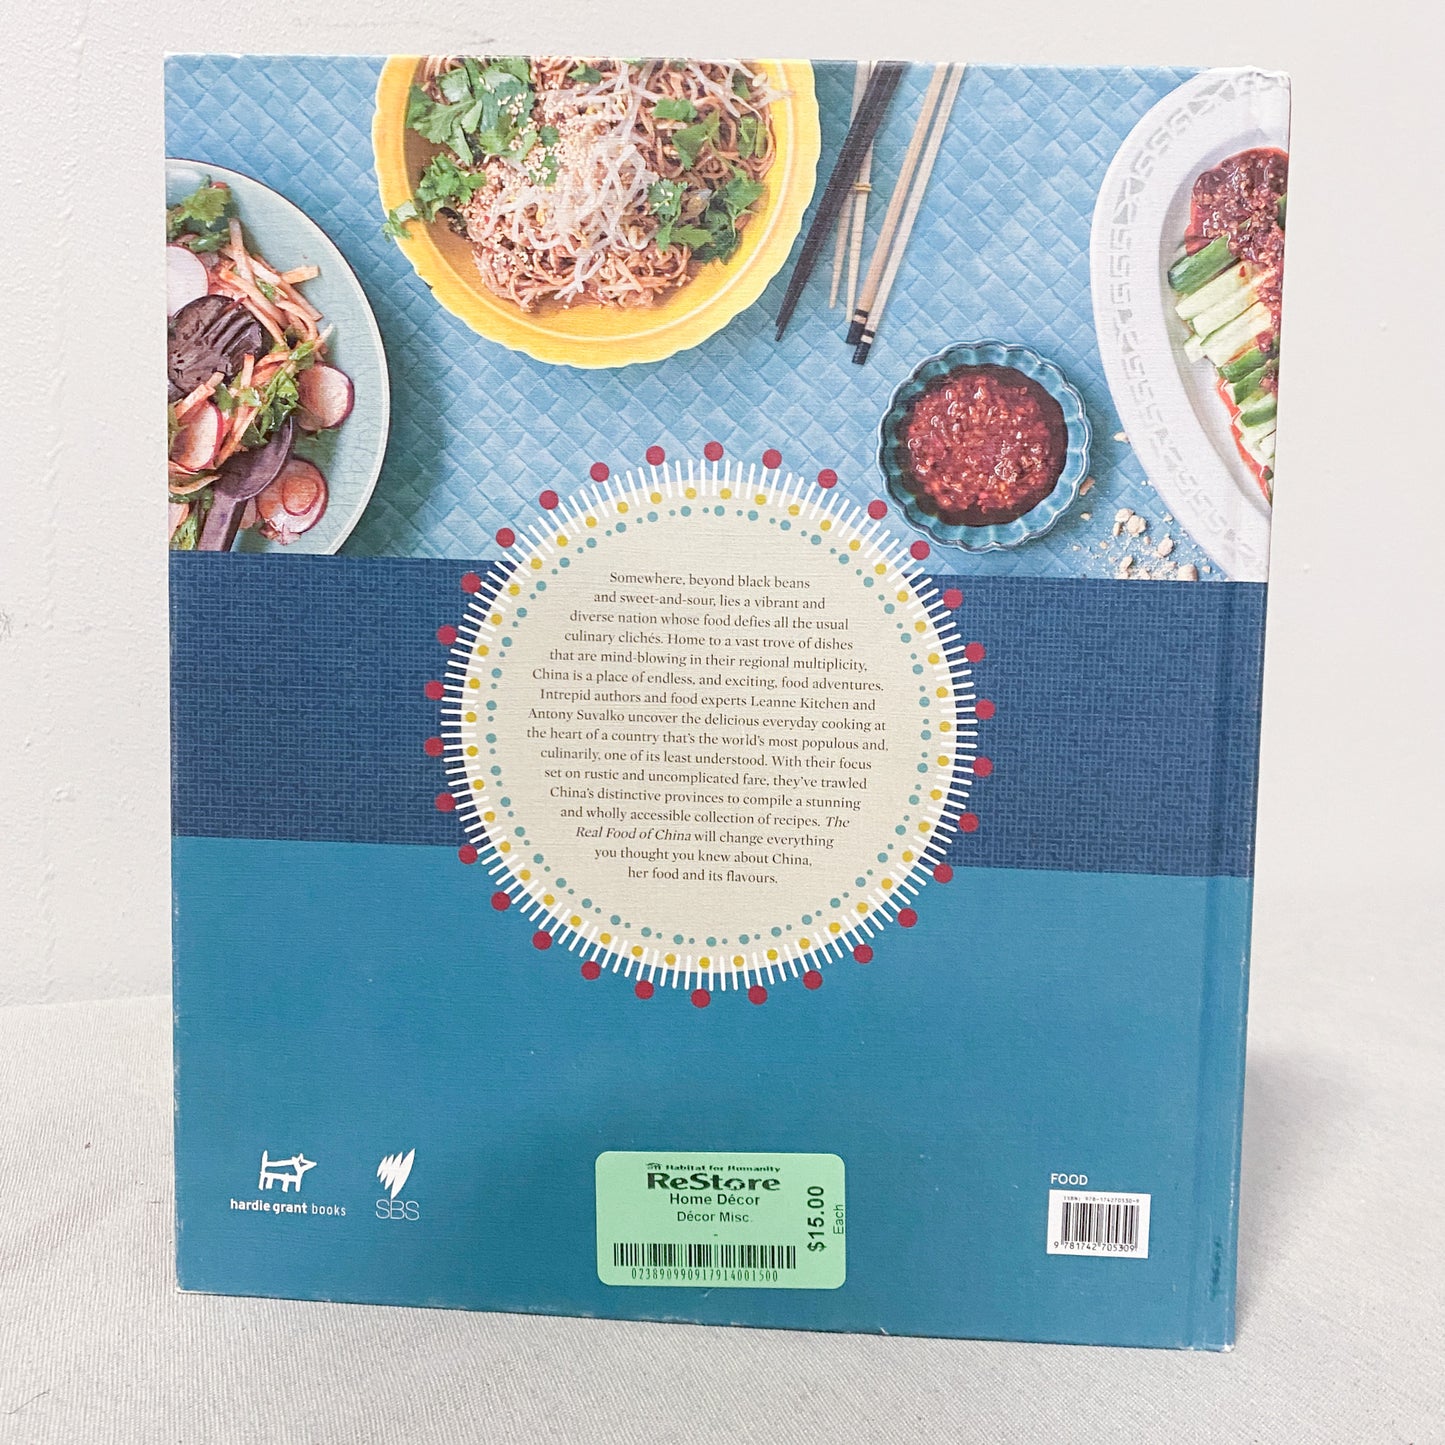 'The Real Food of China' Cookbook